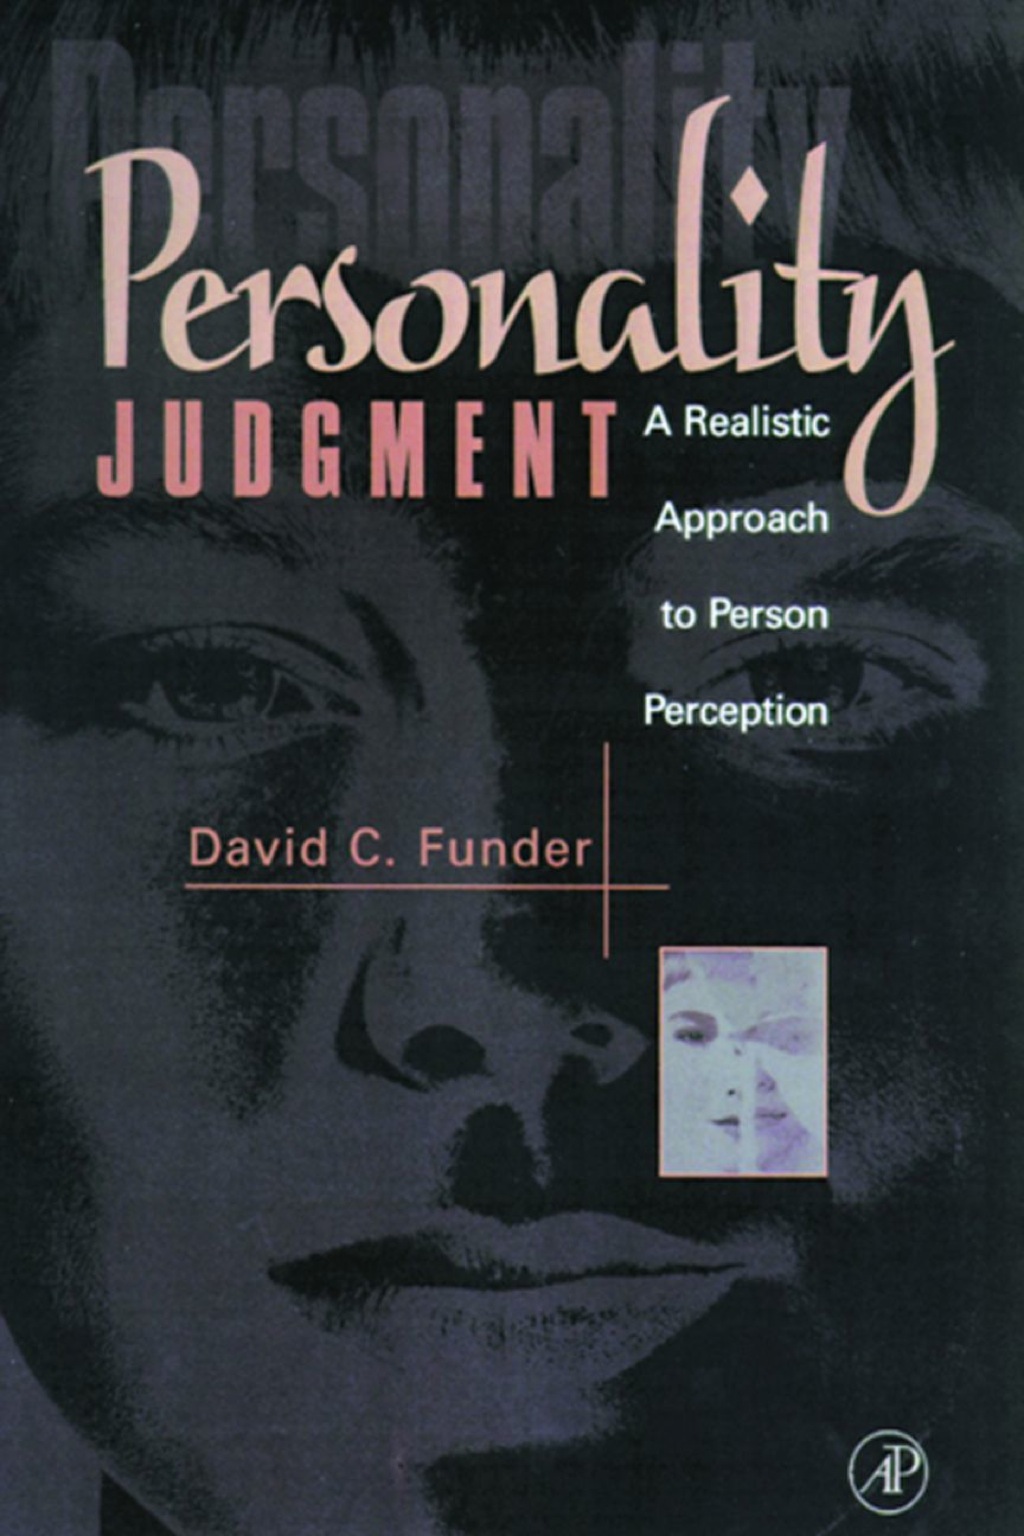 Personality Judgment: A Realistic Approach to Person Perception (eBook) - Funder,  David C.